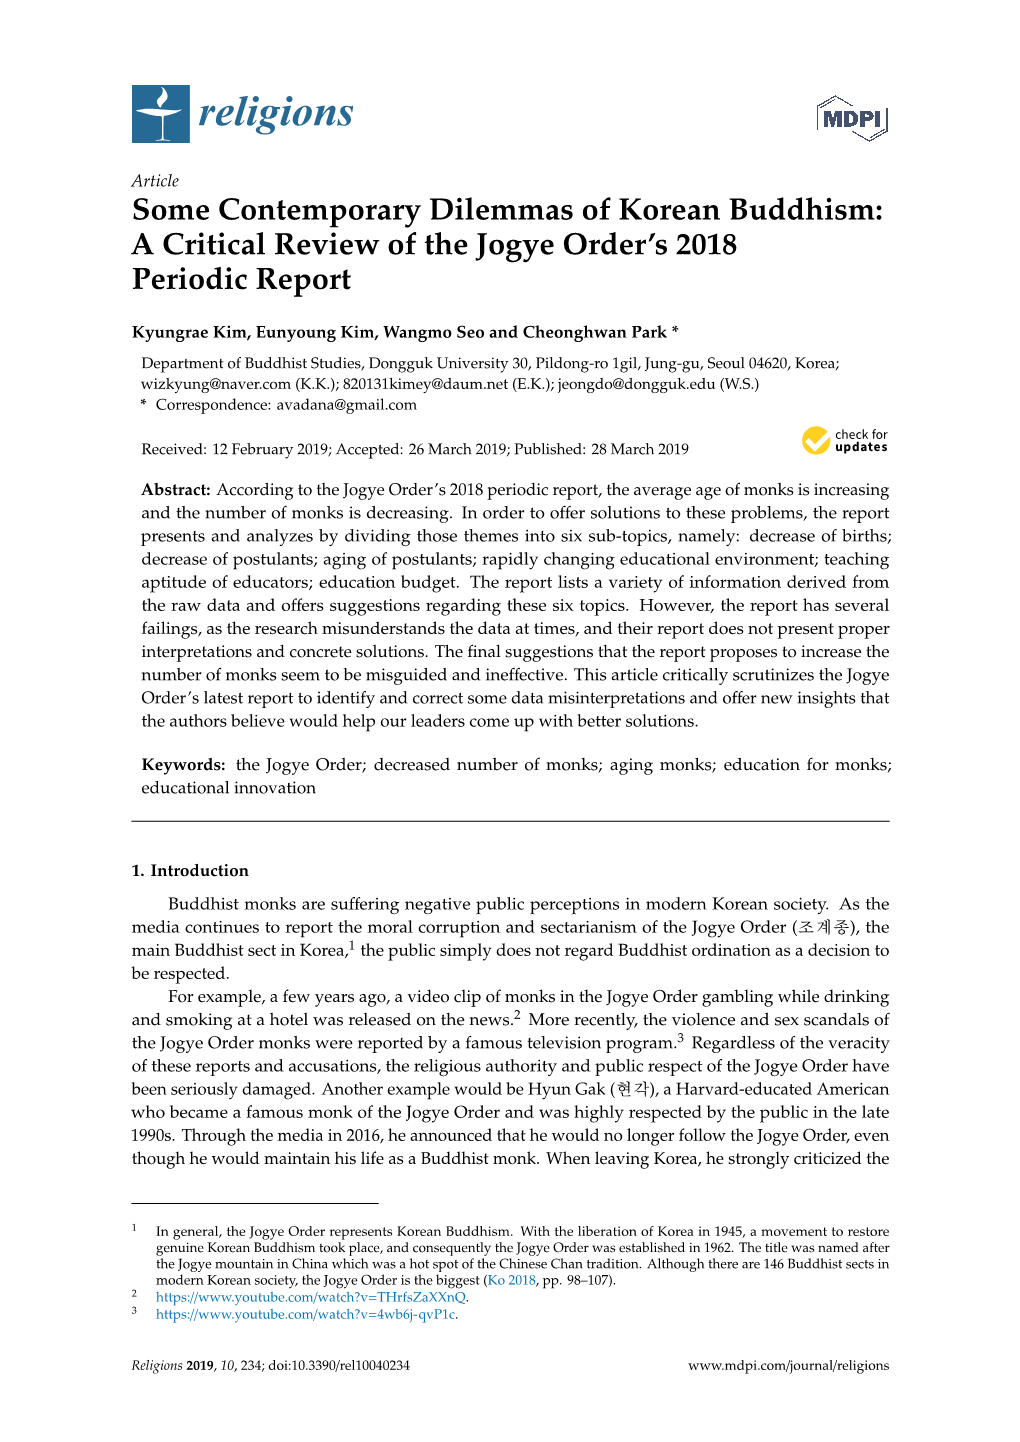 Some Contemporary Dilemmas of Korean Buddhism: a Critical Review of the Jogye Order’S 2018 Periodic Report